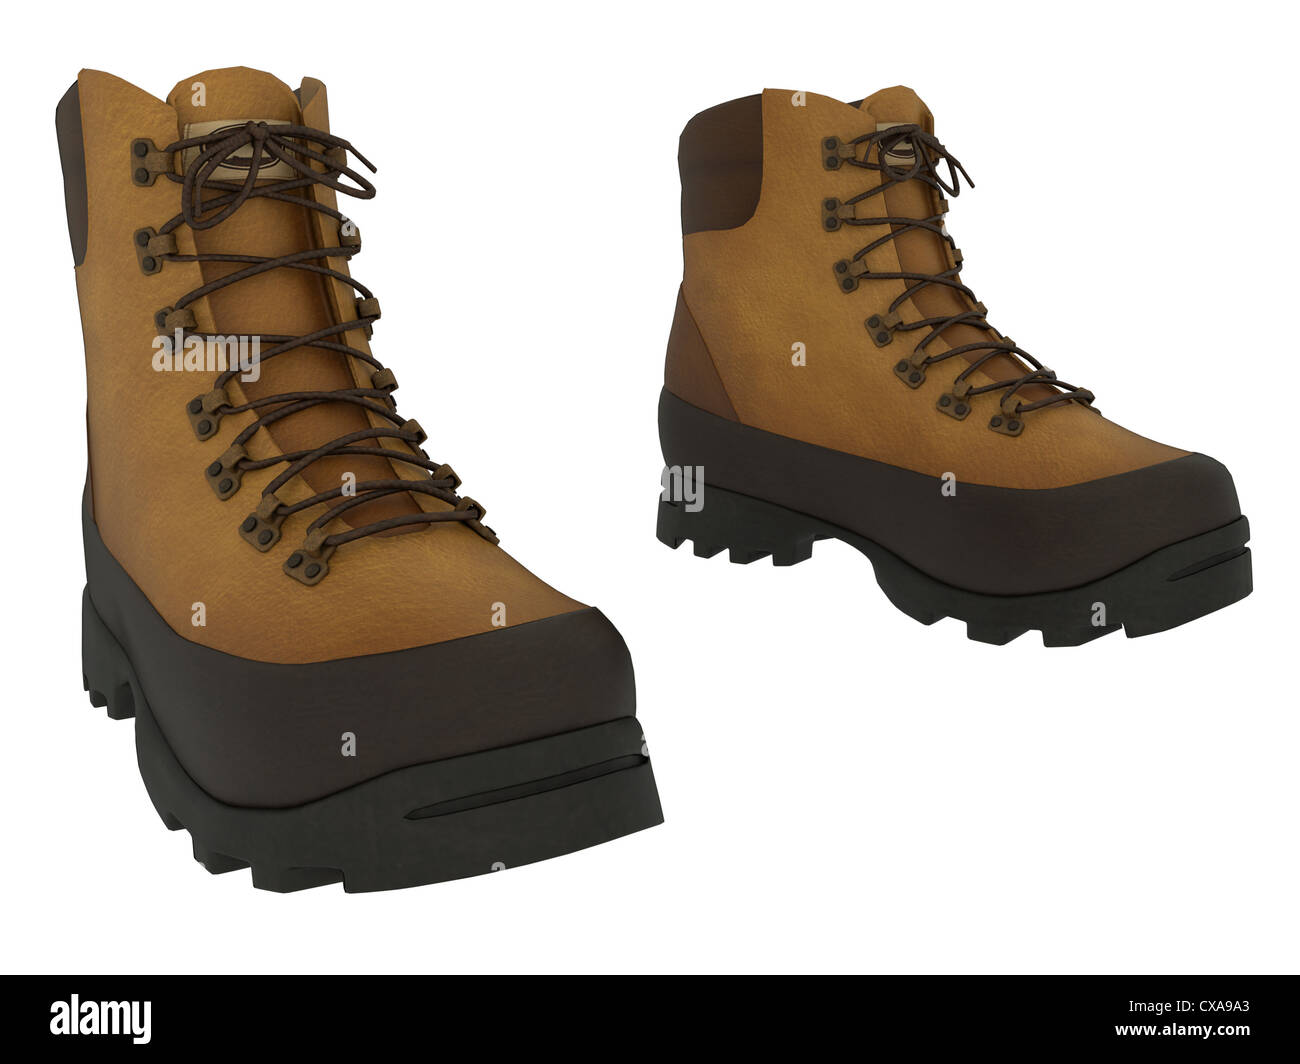 Boots for winter. Hiking boots. Stock Photo